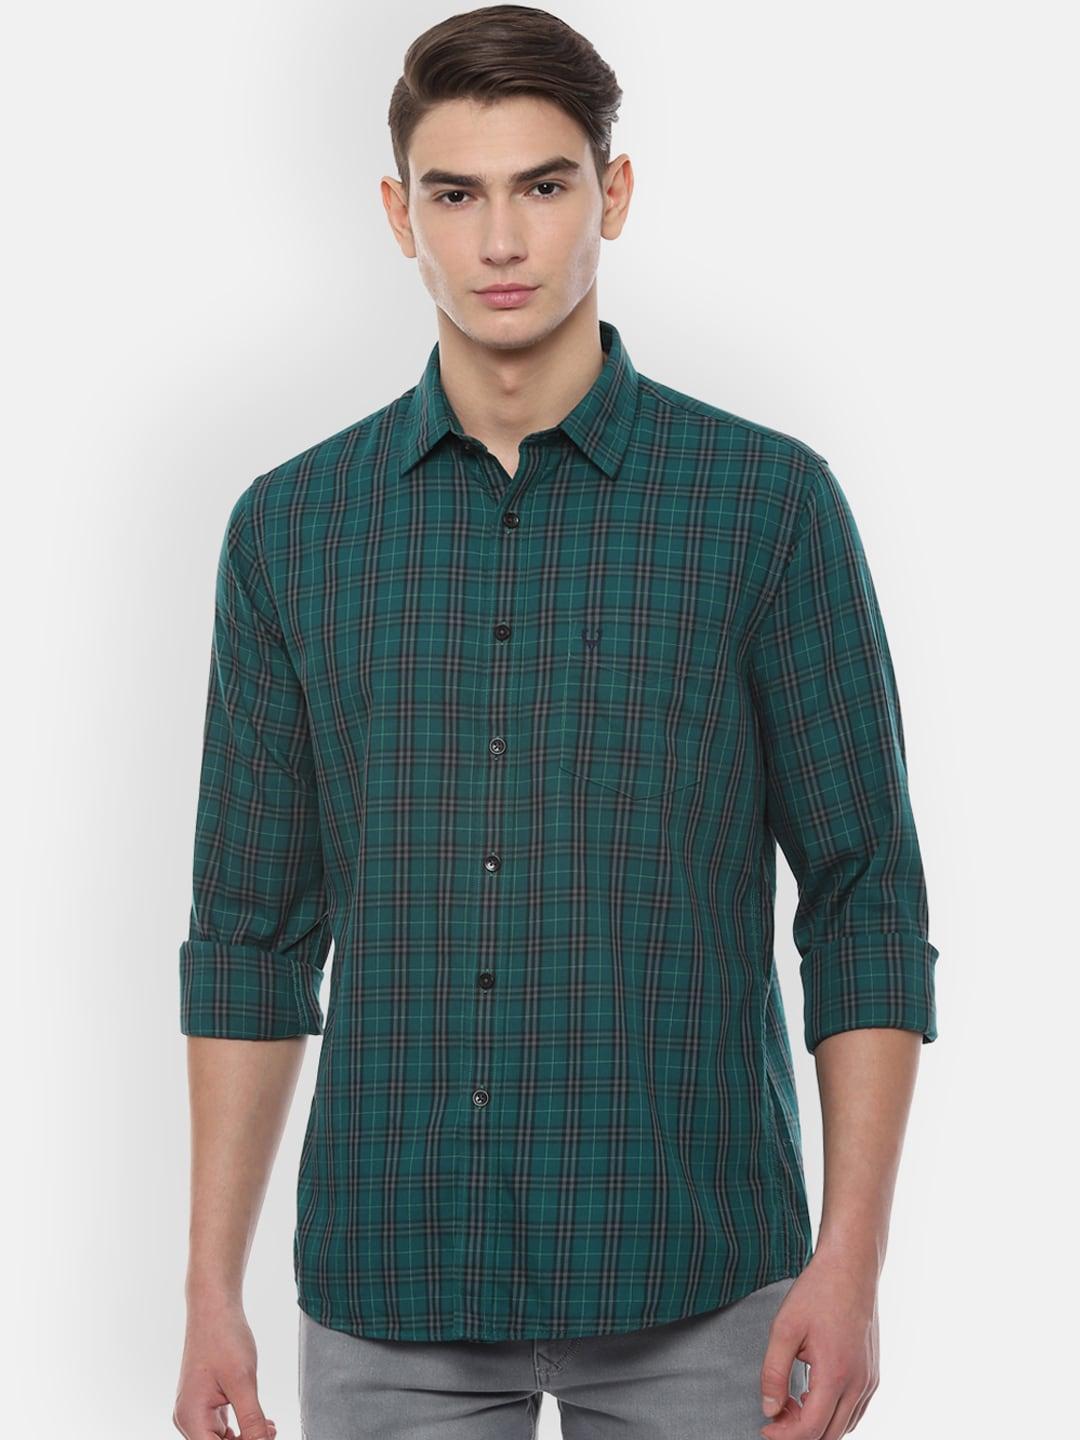 Allen Solly Men Green & Black Slim Fit Checked Casual Shirt